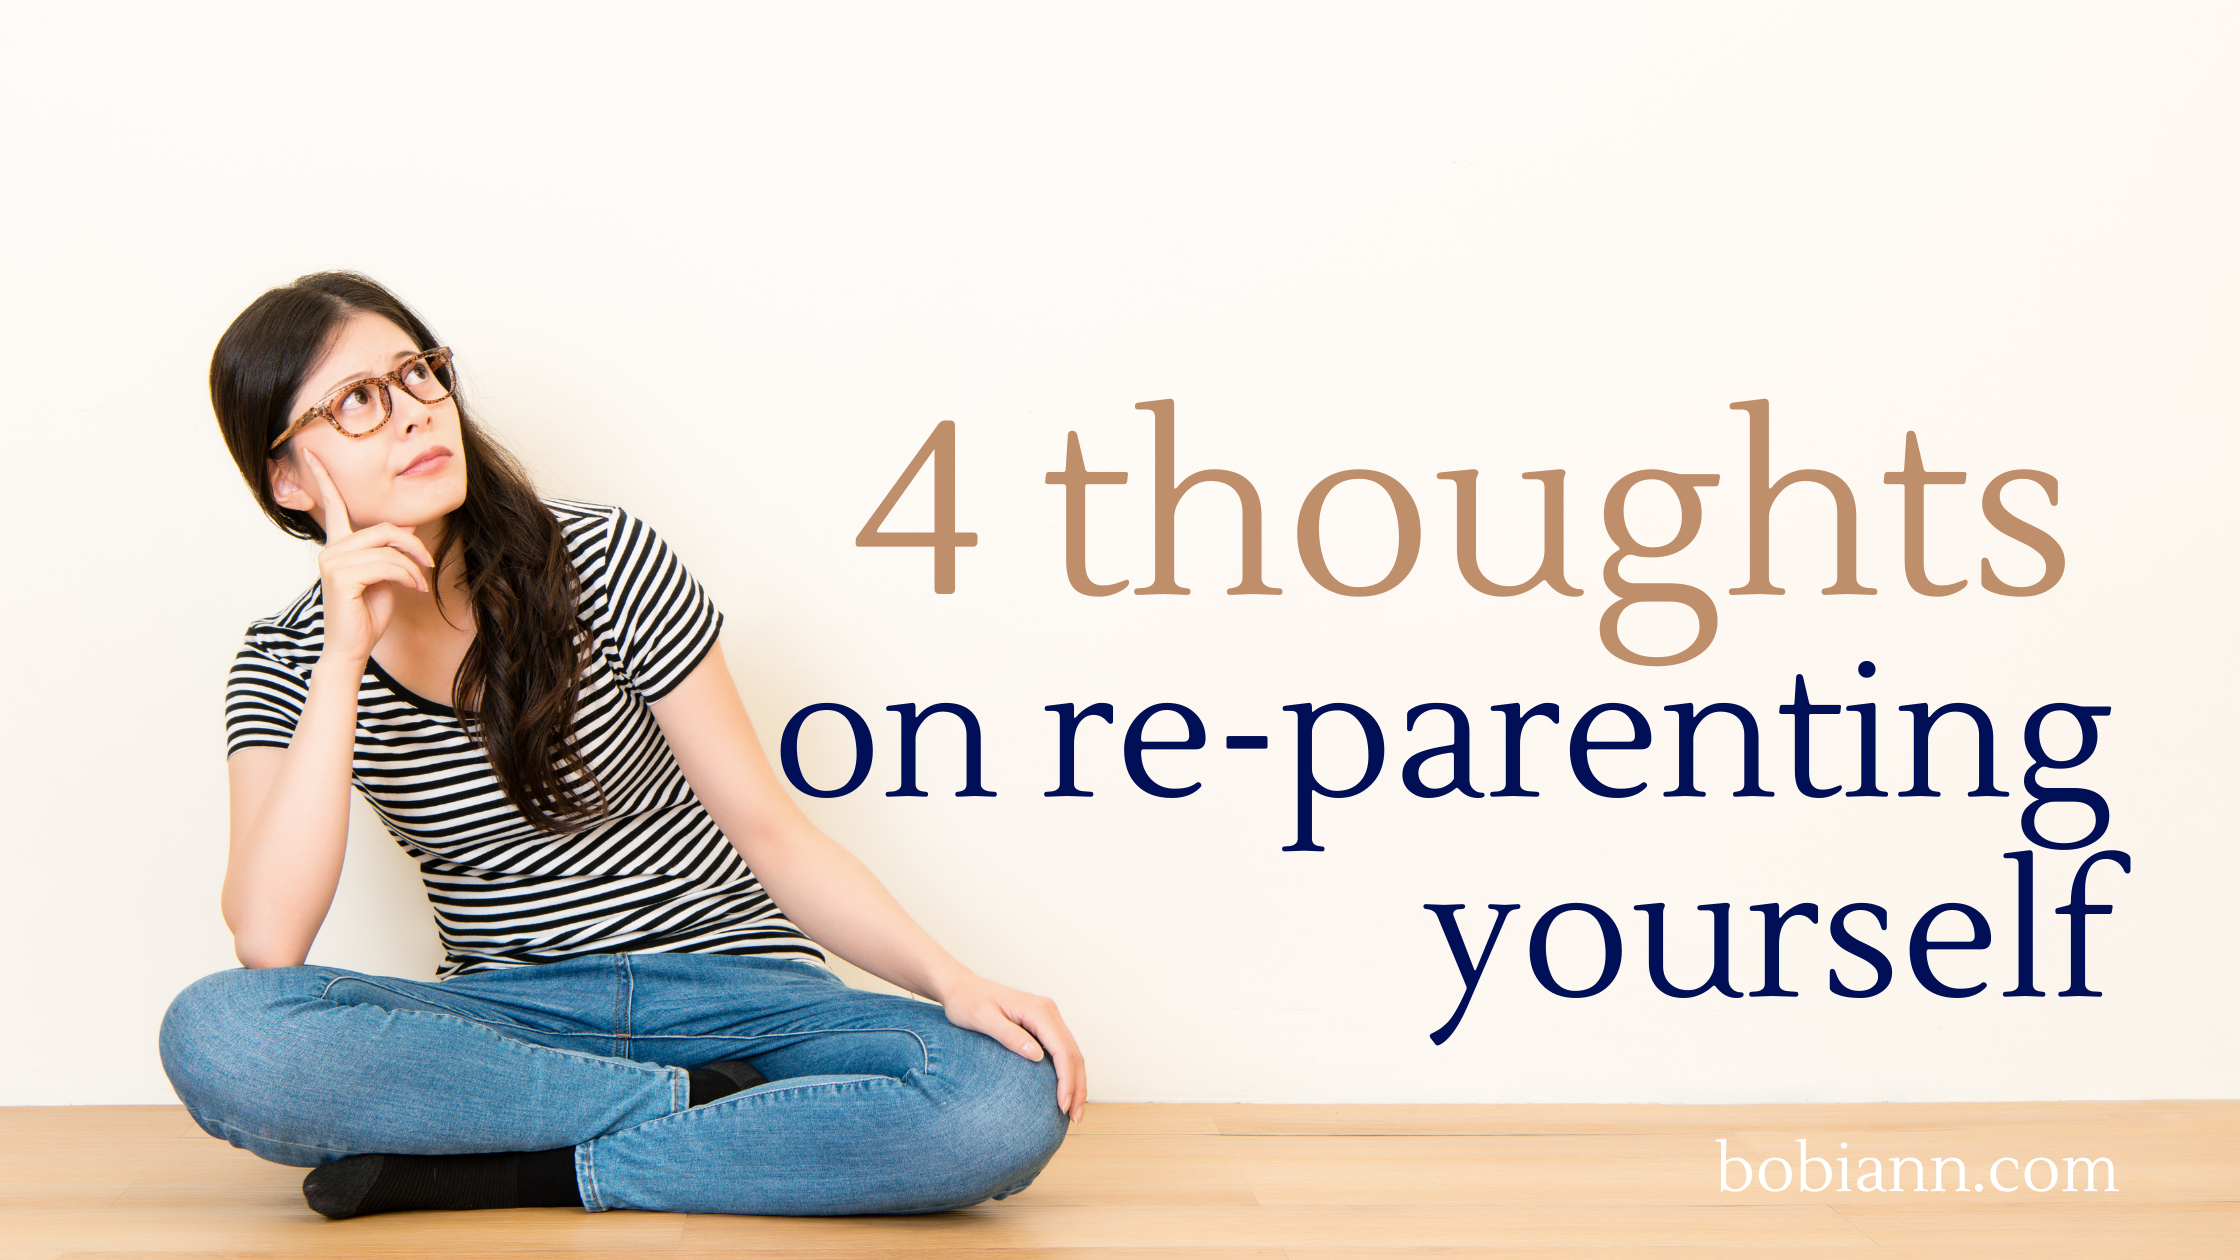 4 thoughts on re-parenting yourself